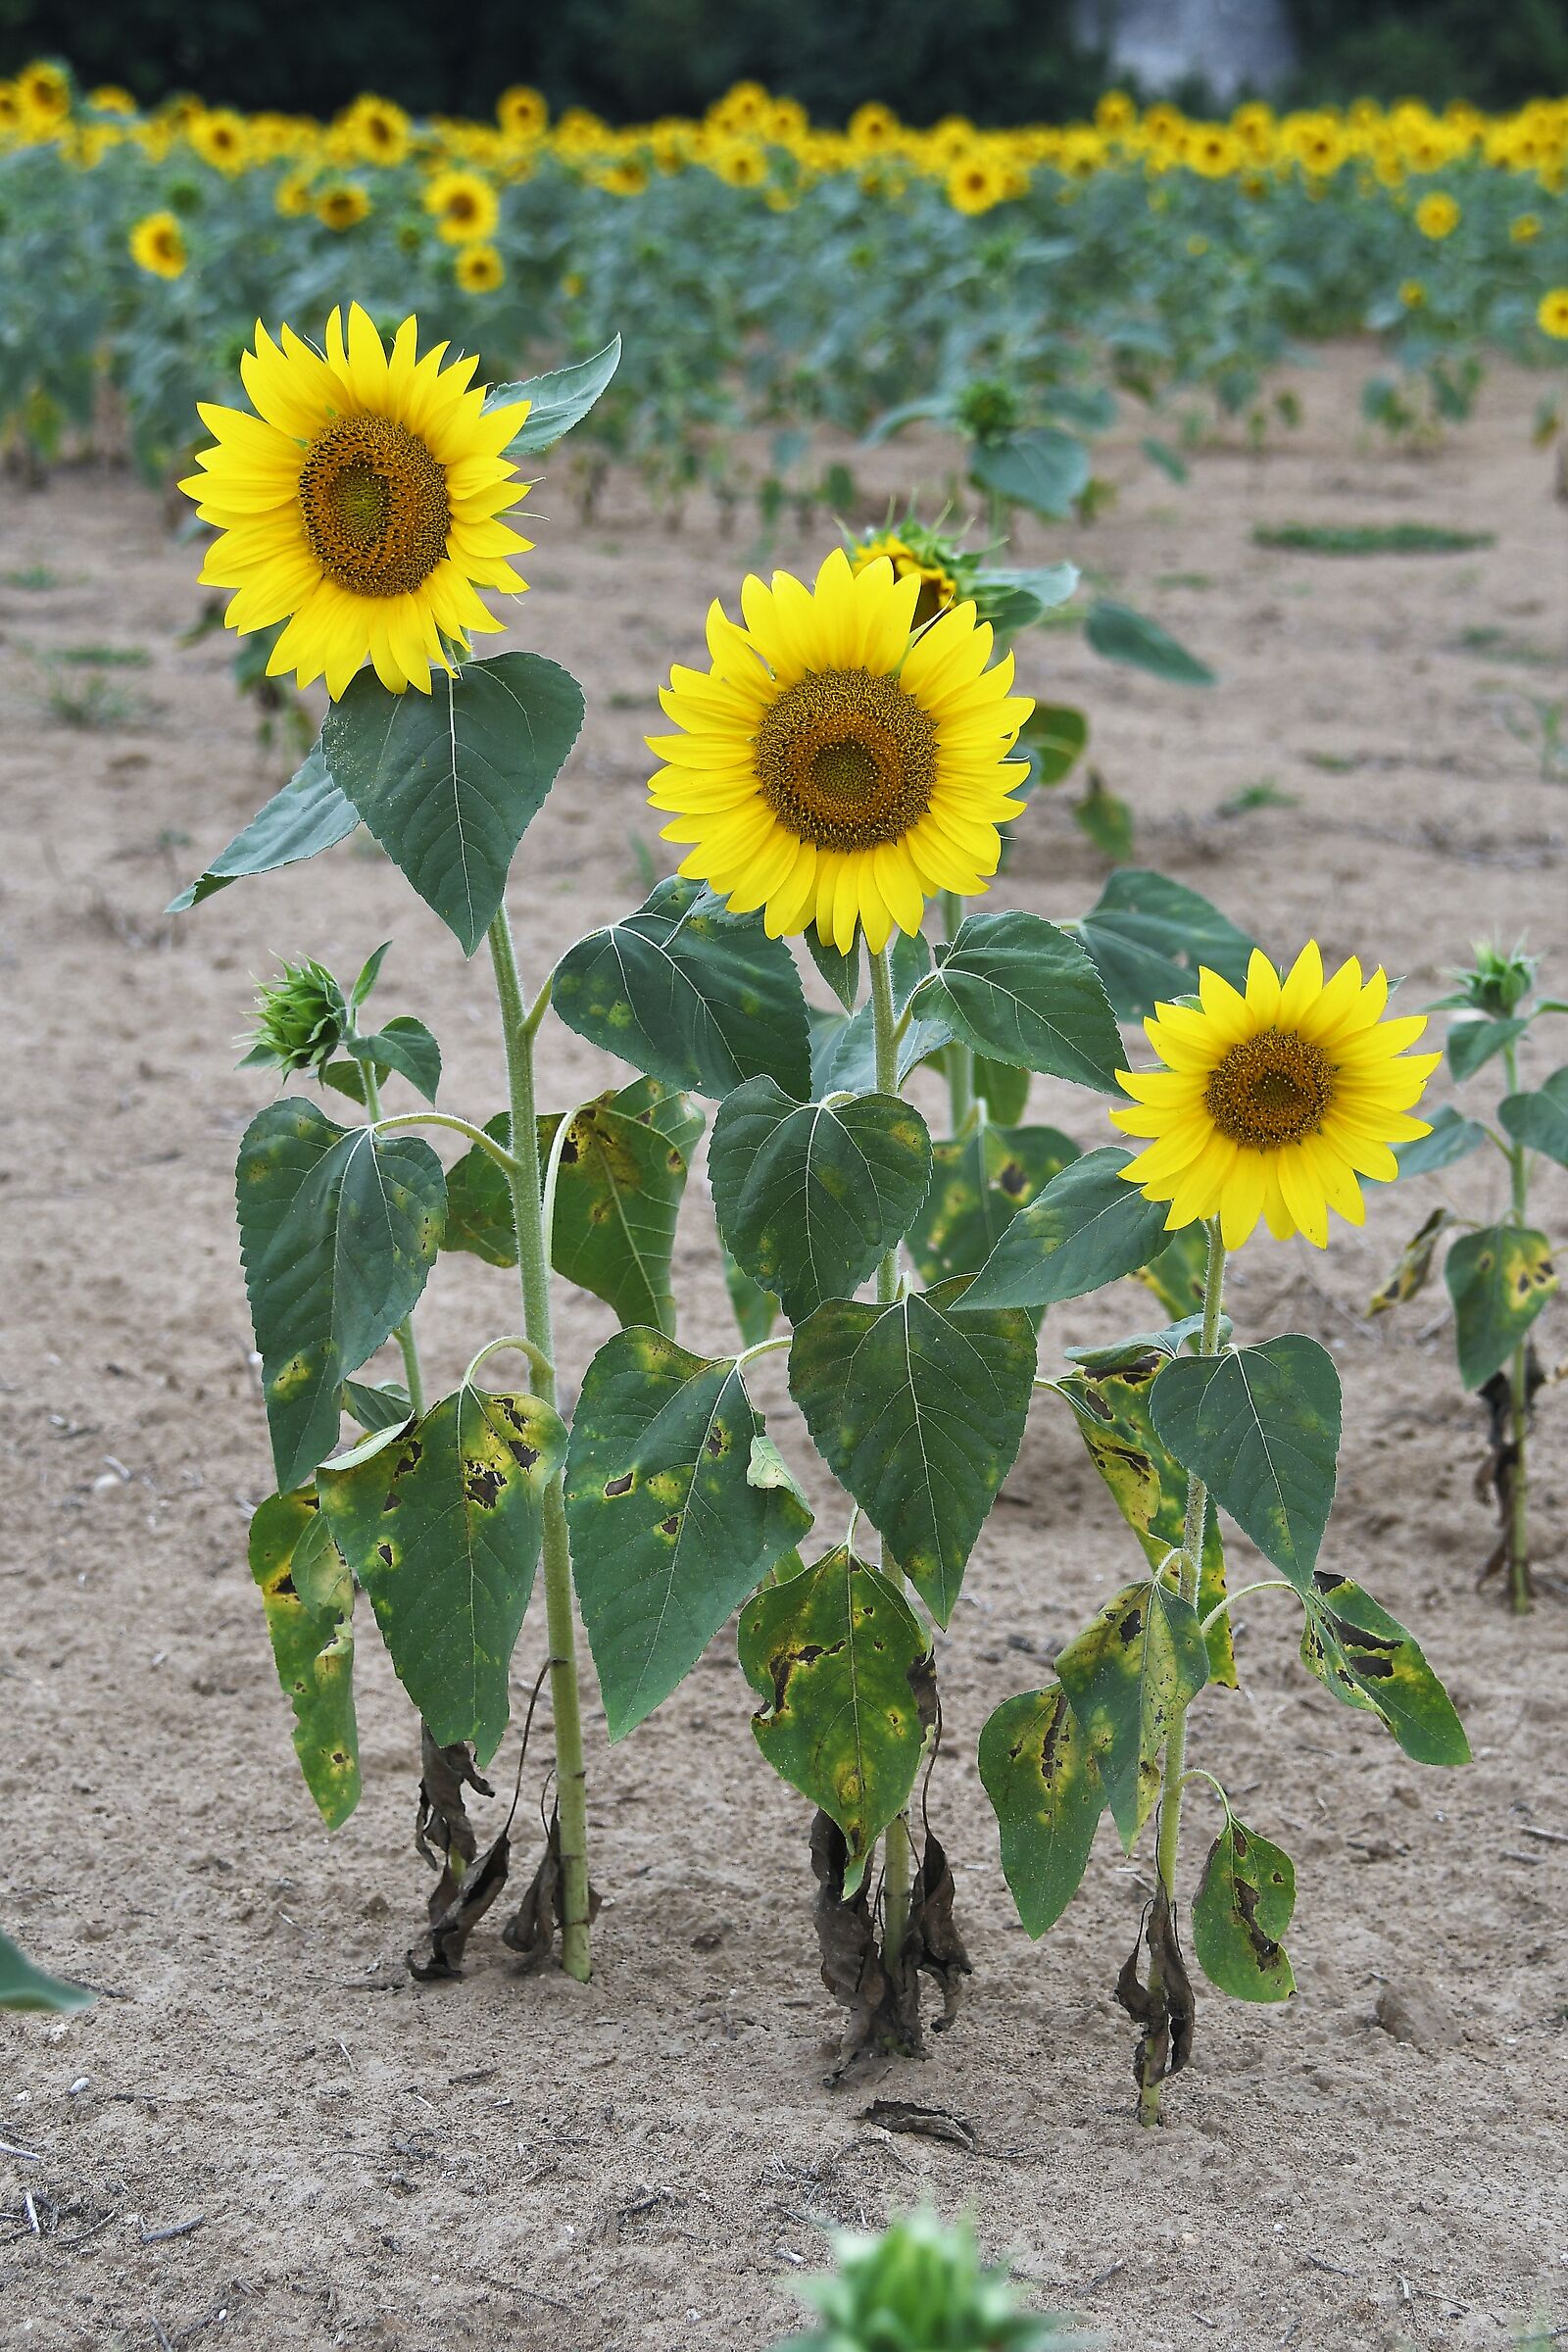 Sunflowers .... the three brothers...